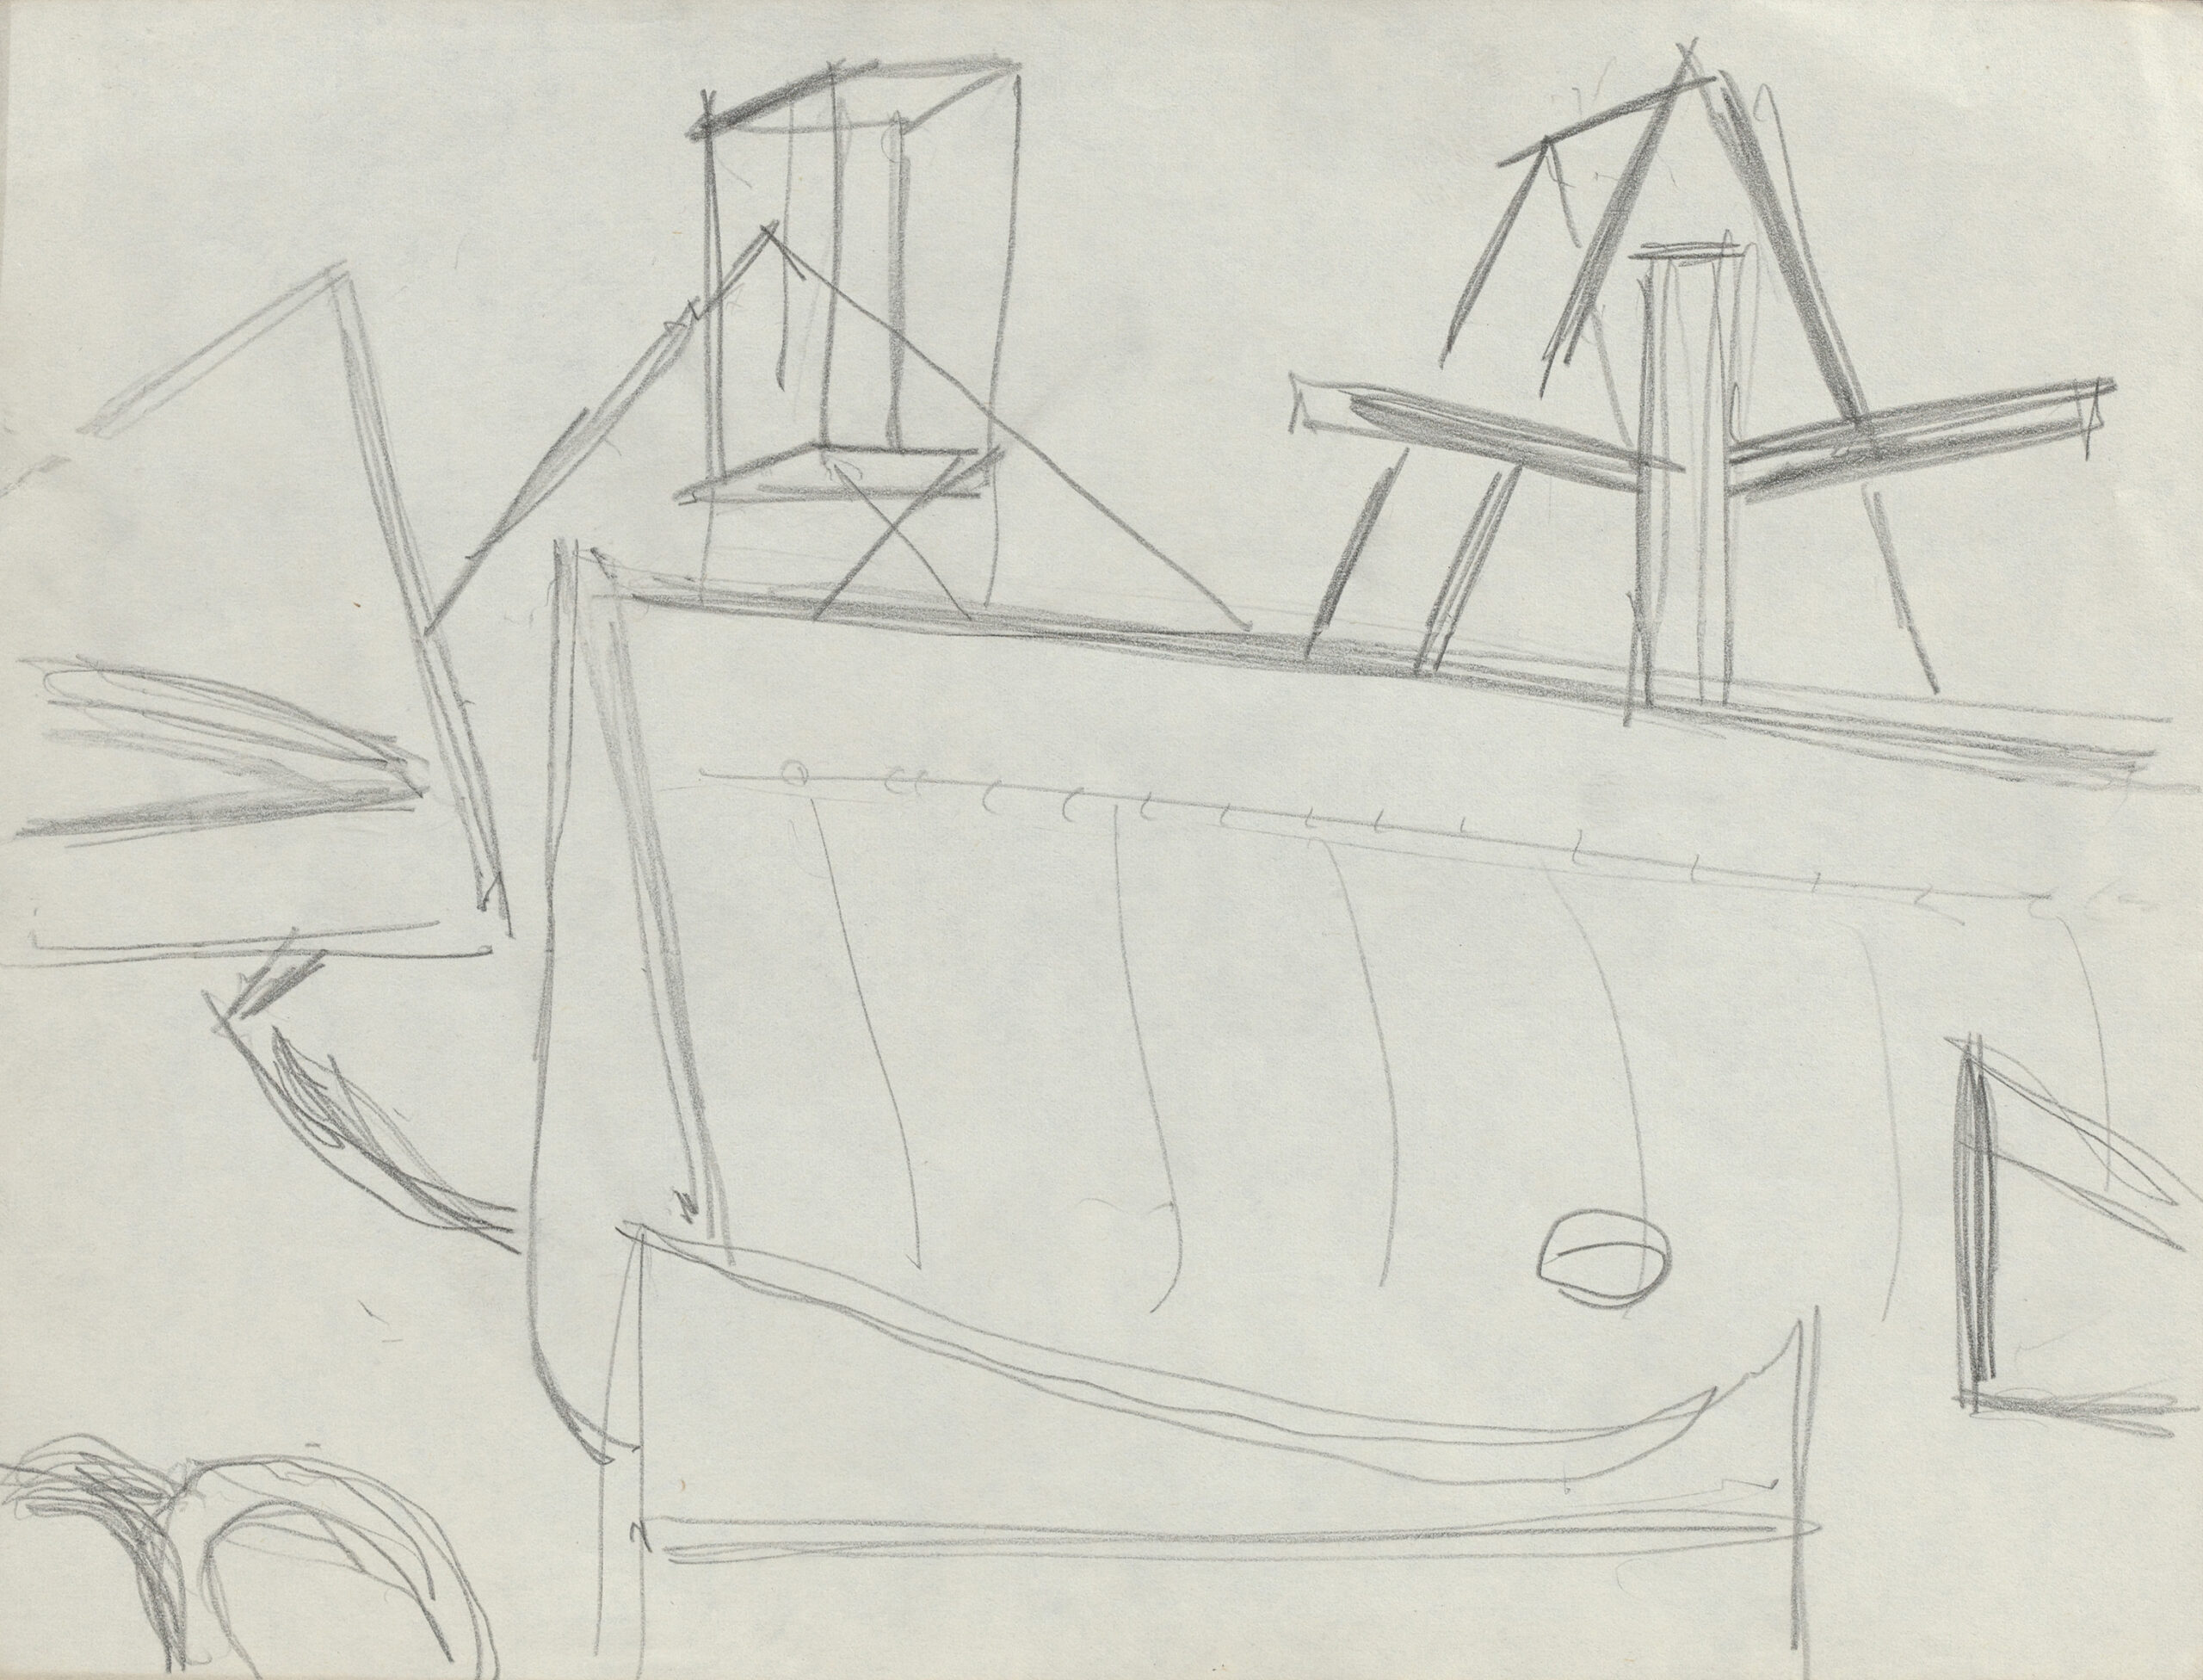 Pencil sketch of an aircraft wing fixture.